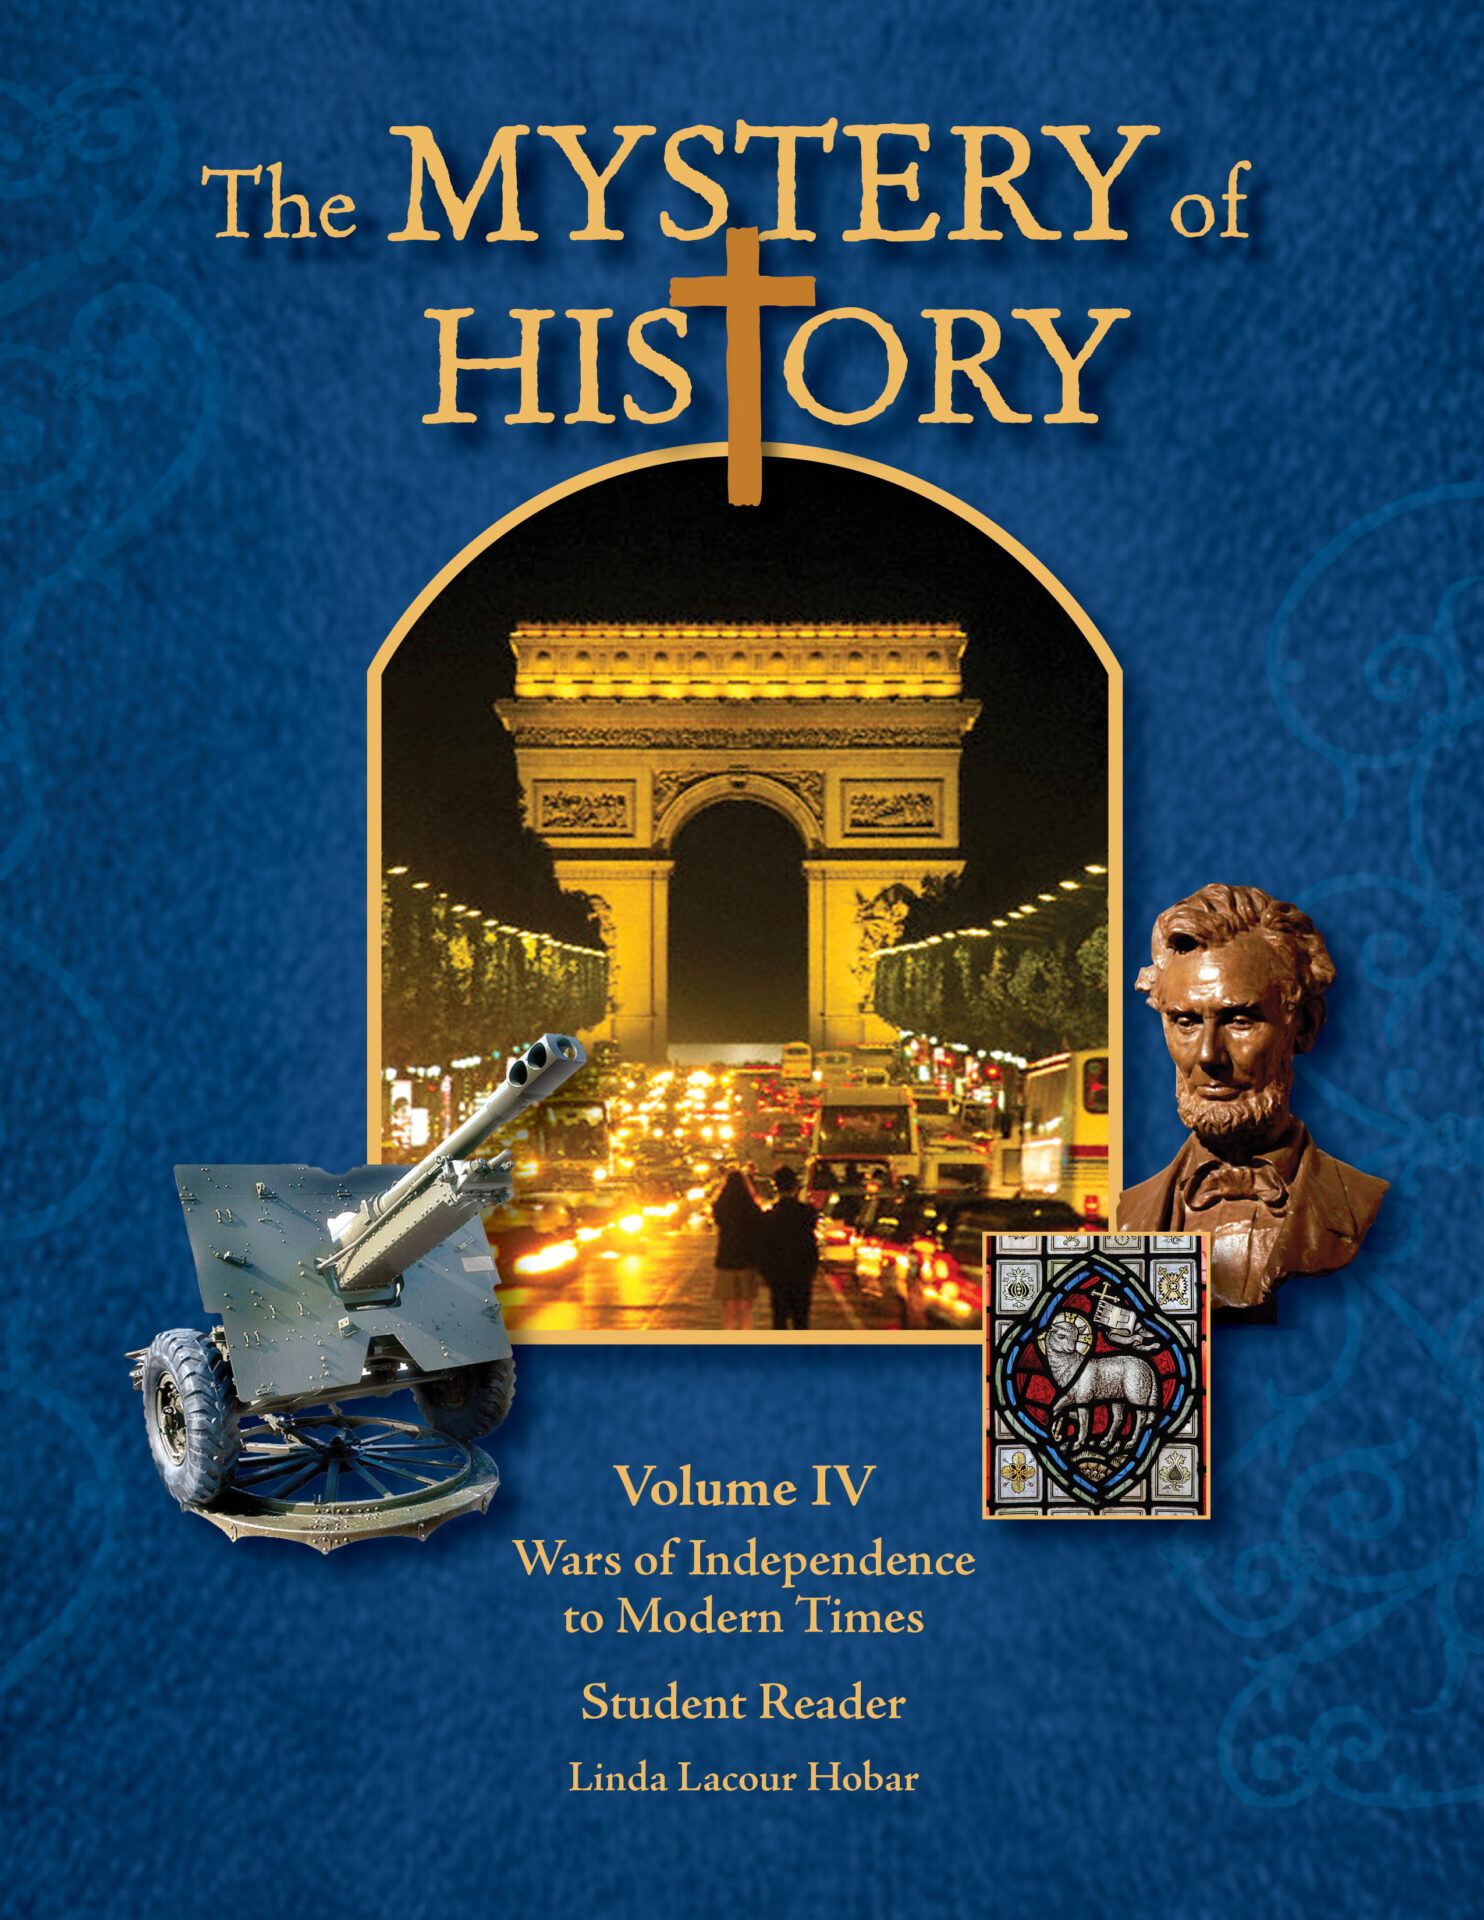 History mysteries. The History book. Mystery story. Histories Volume 1.